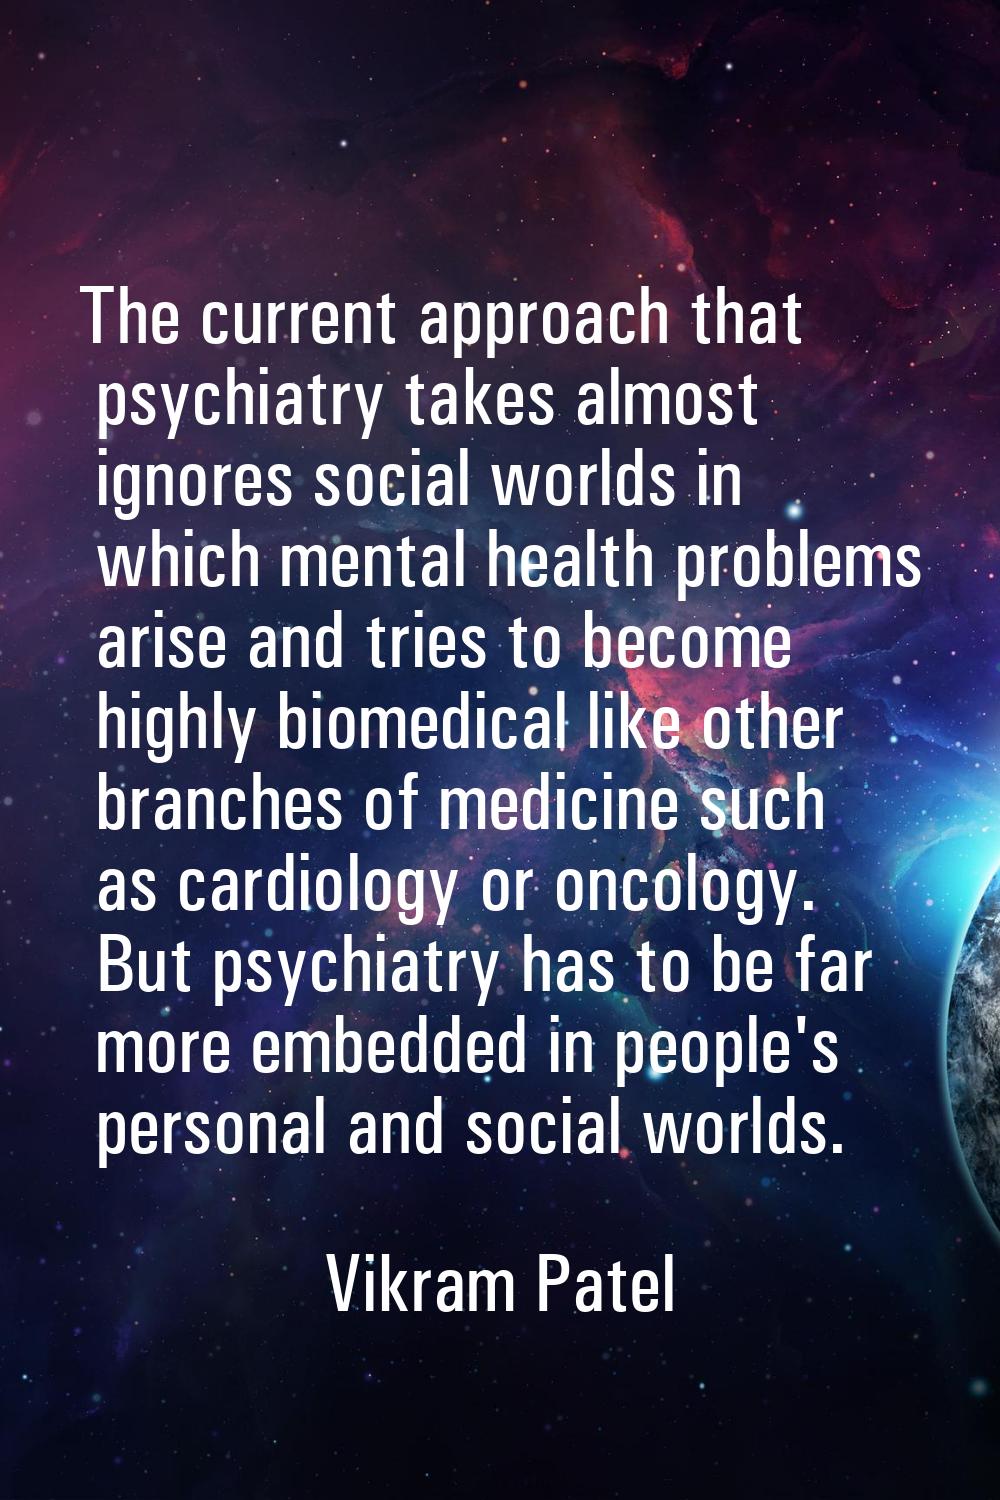 The current approach that psychiatry takes almost ignores social worlds in which mental health prob